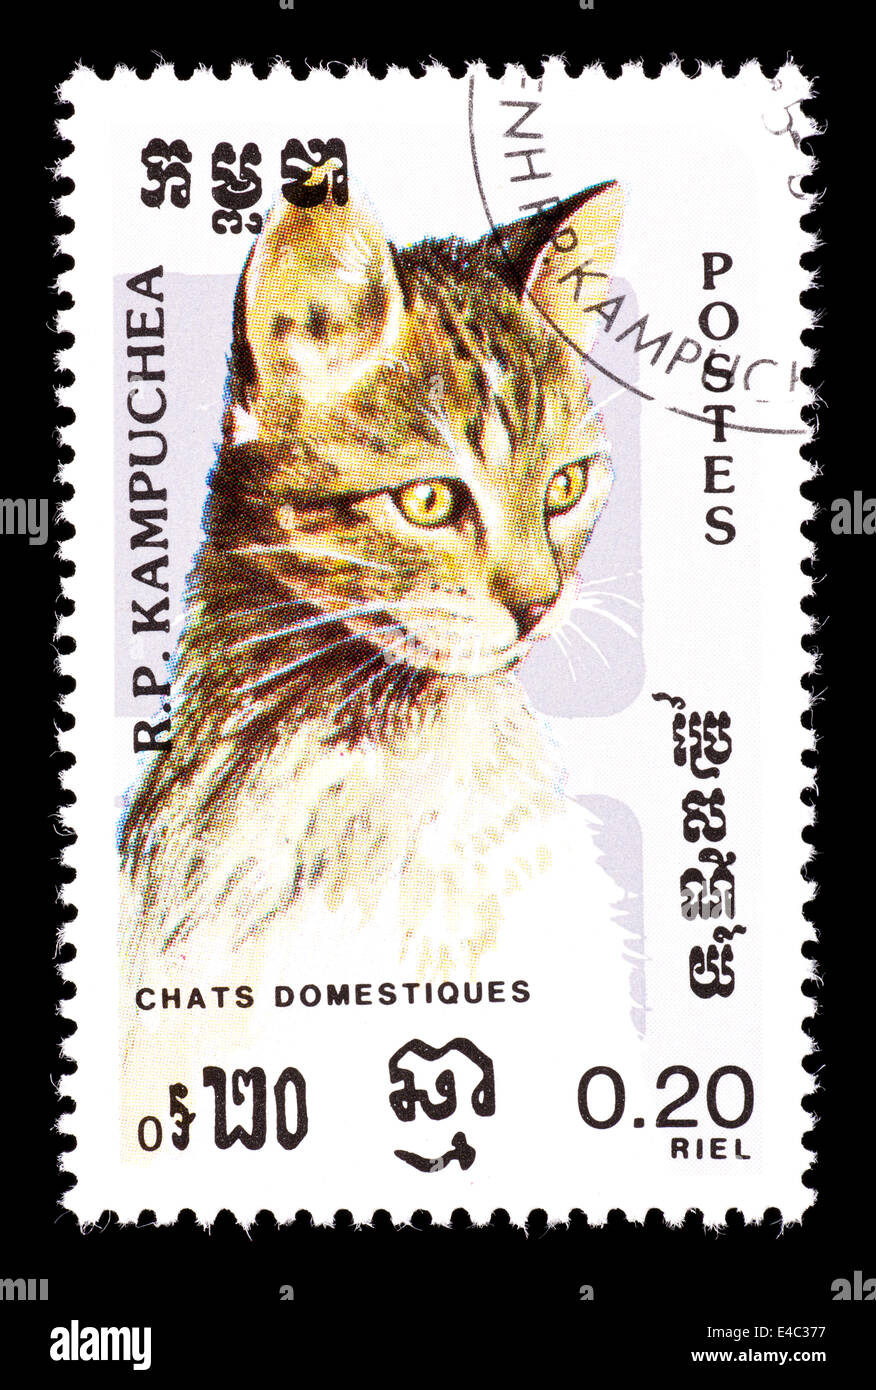 Postage stamp from Cambodia (Kampuchea) depicting a domesticated cat. Stock Photo